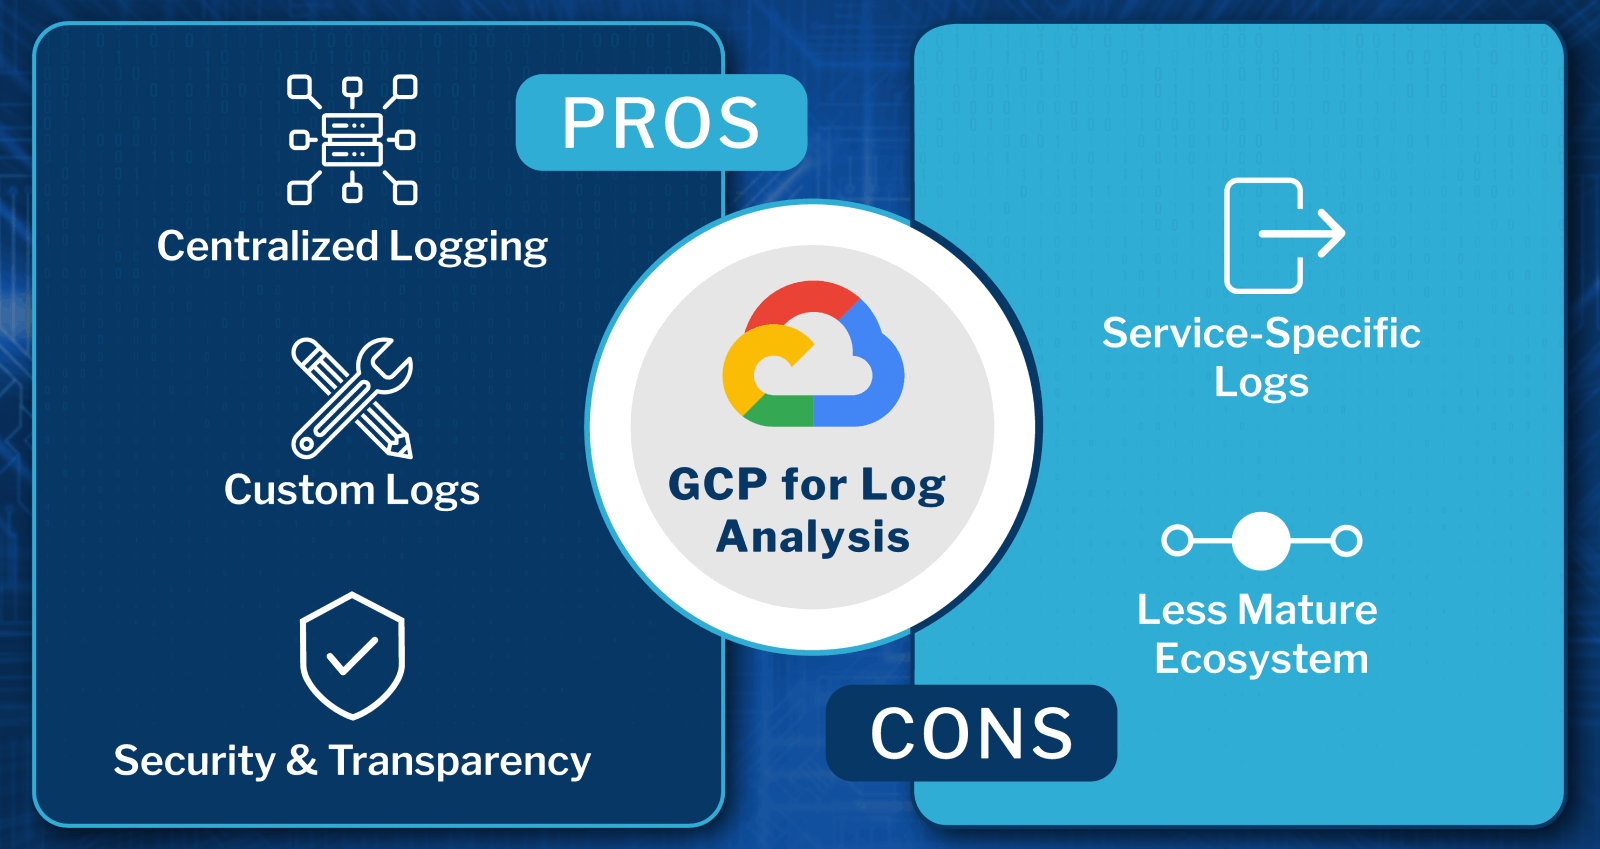 GCP for Log Analysis Pros and Cons